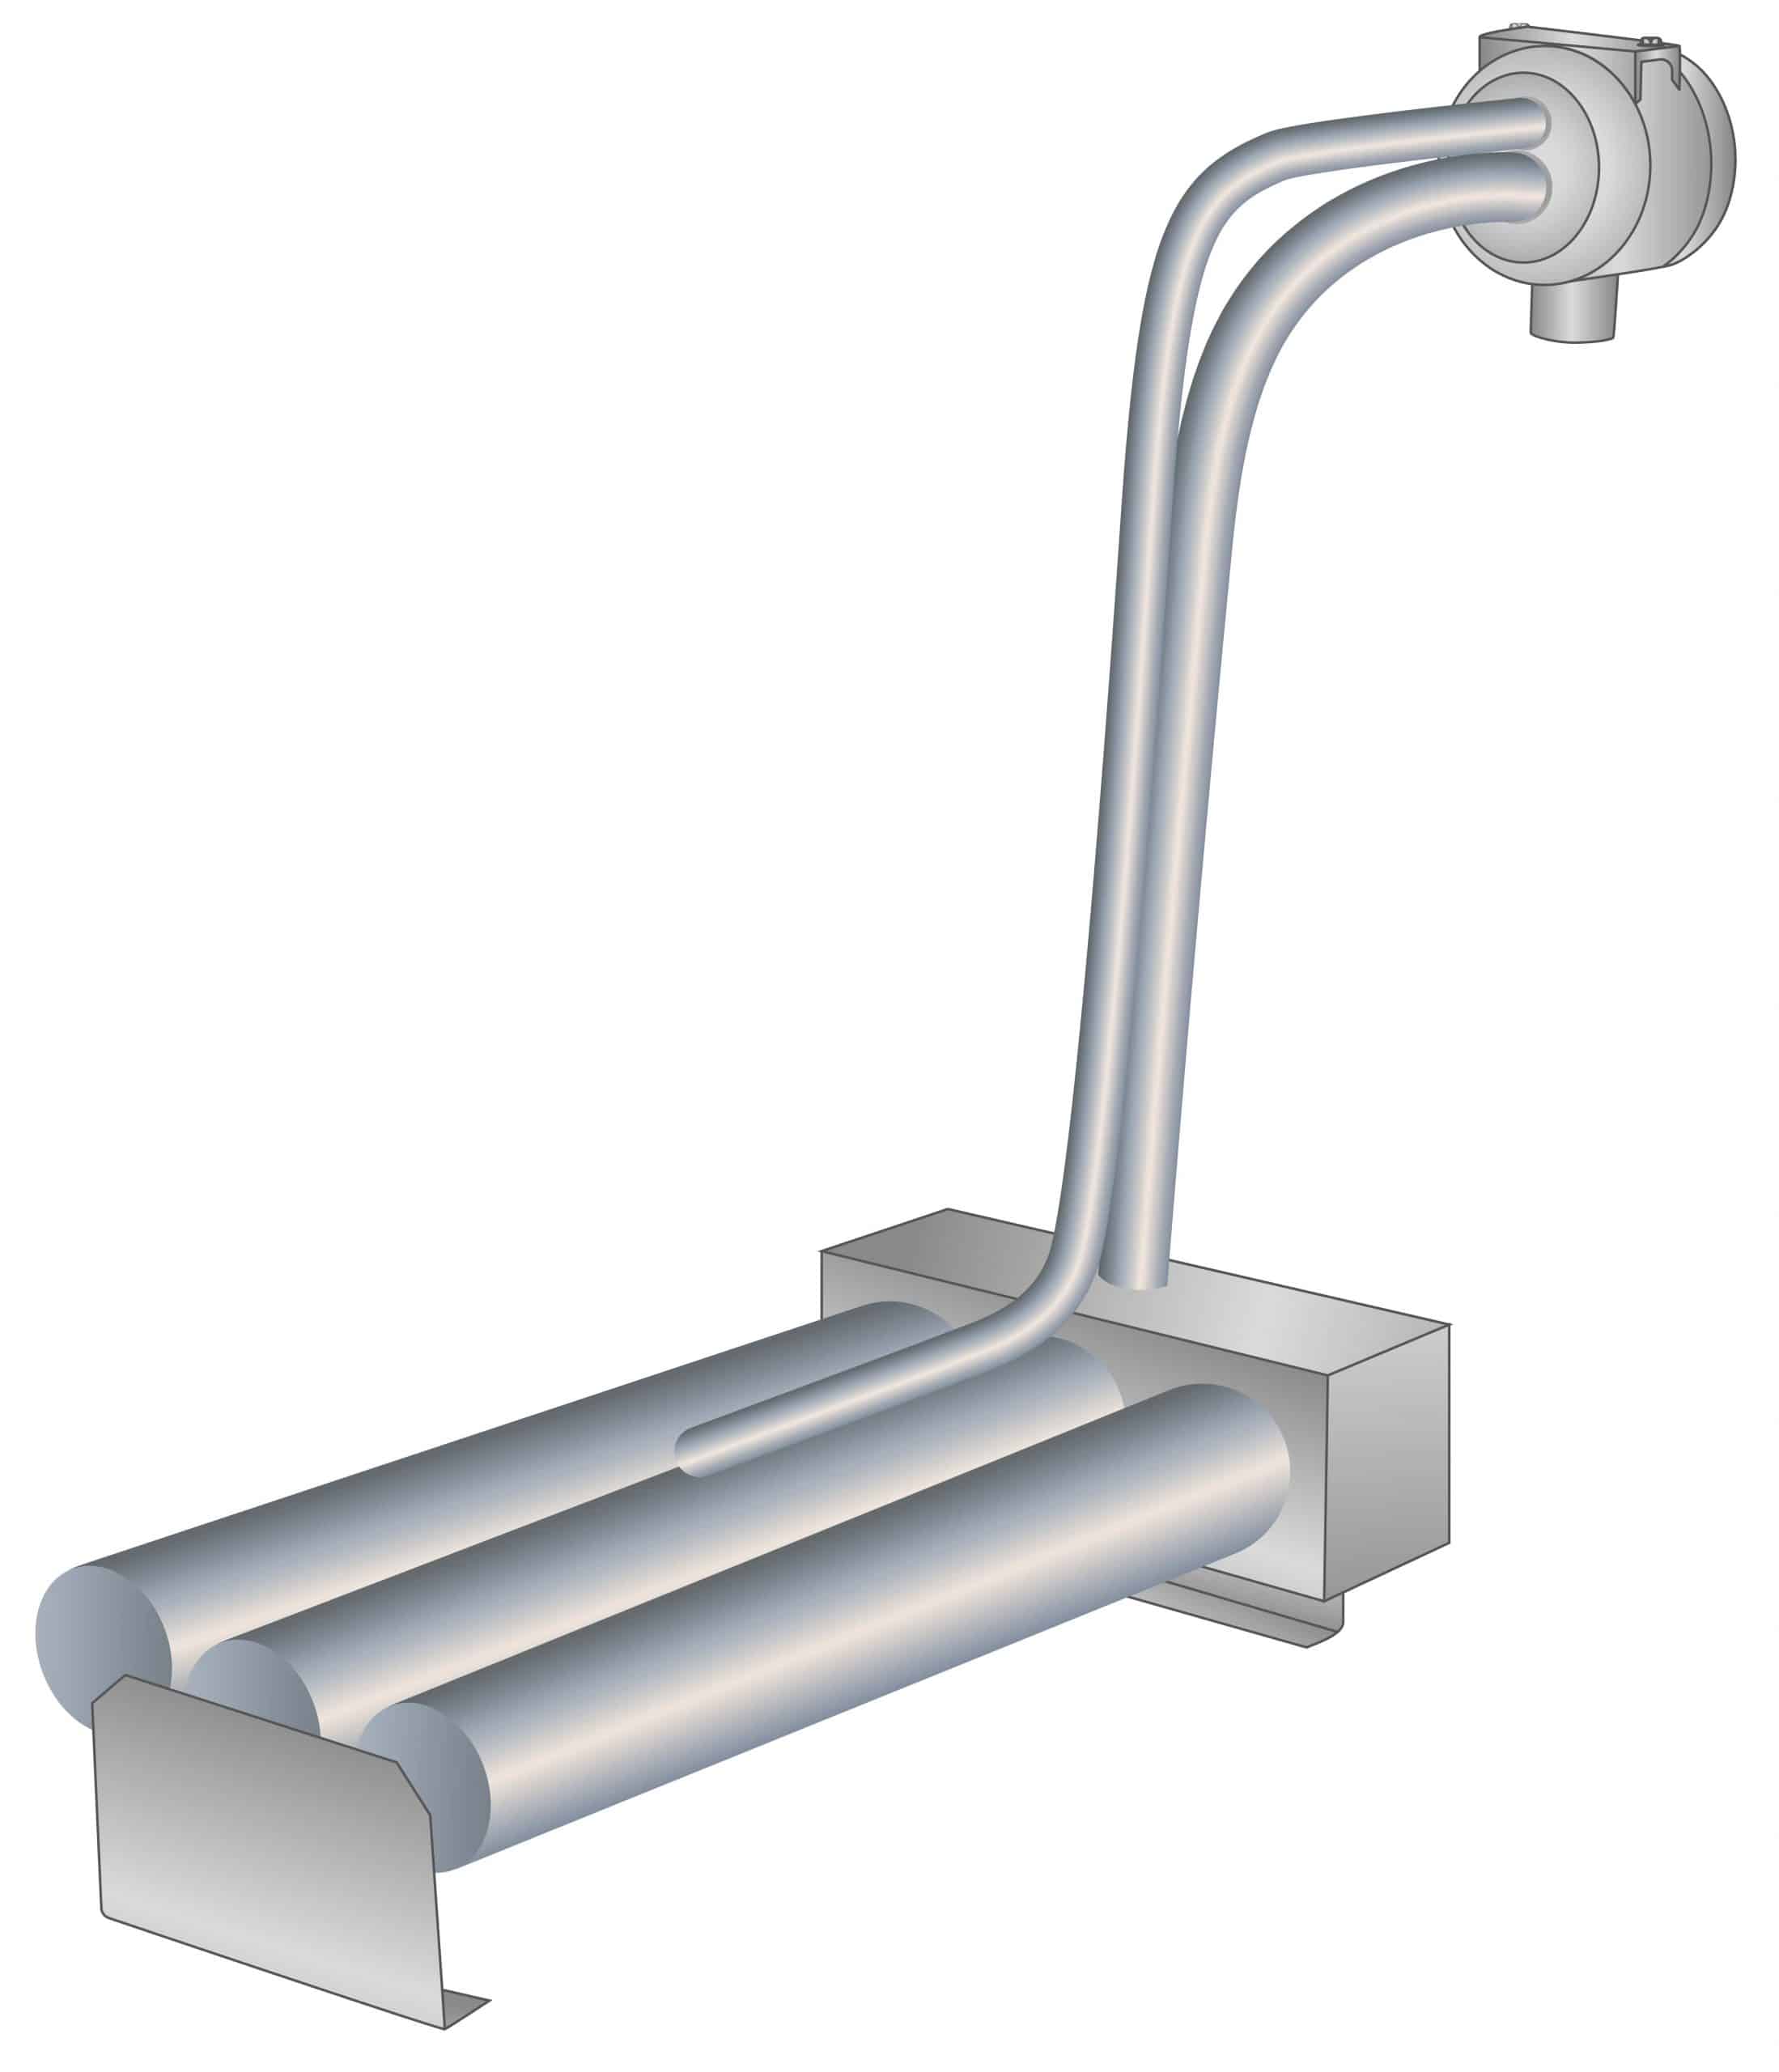 Pipe Insert Immersion Heaters